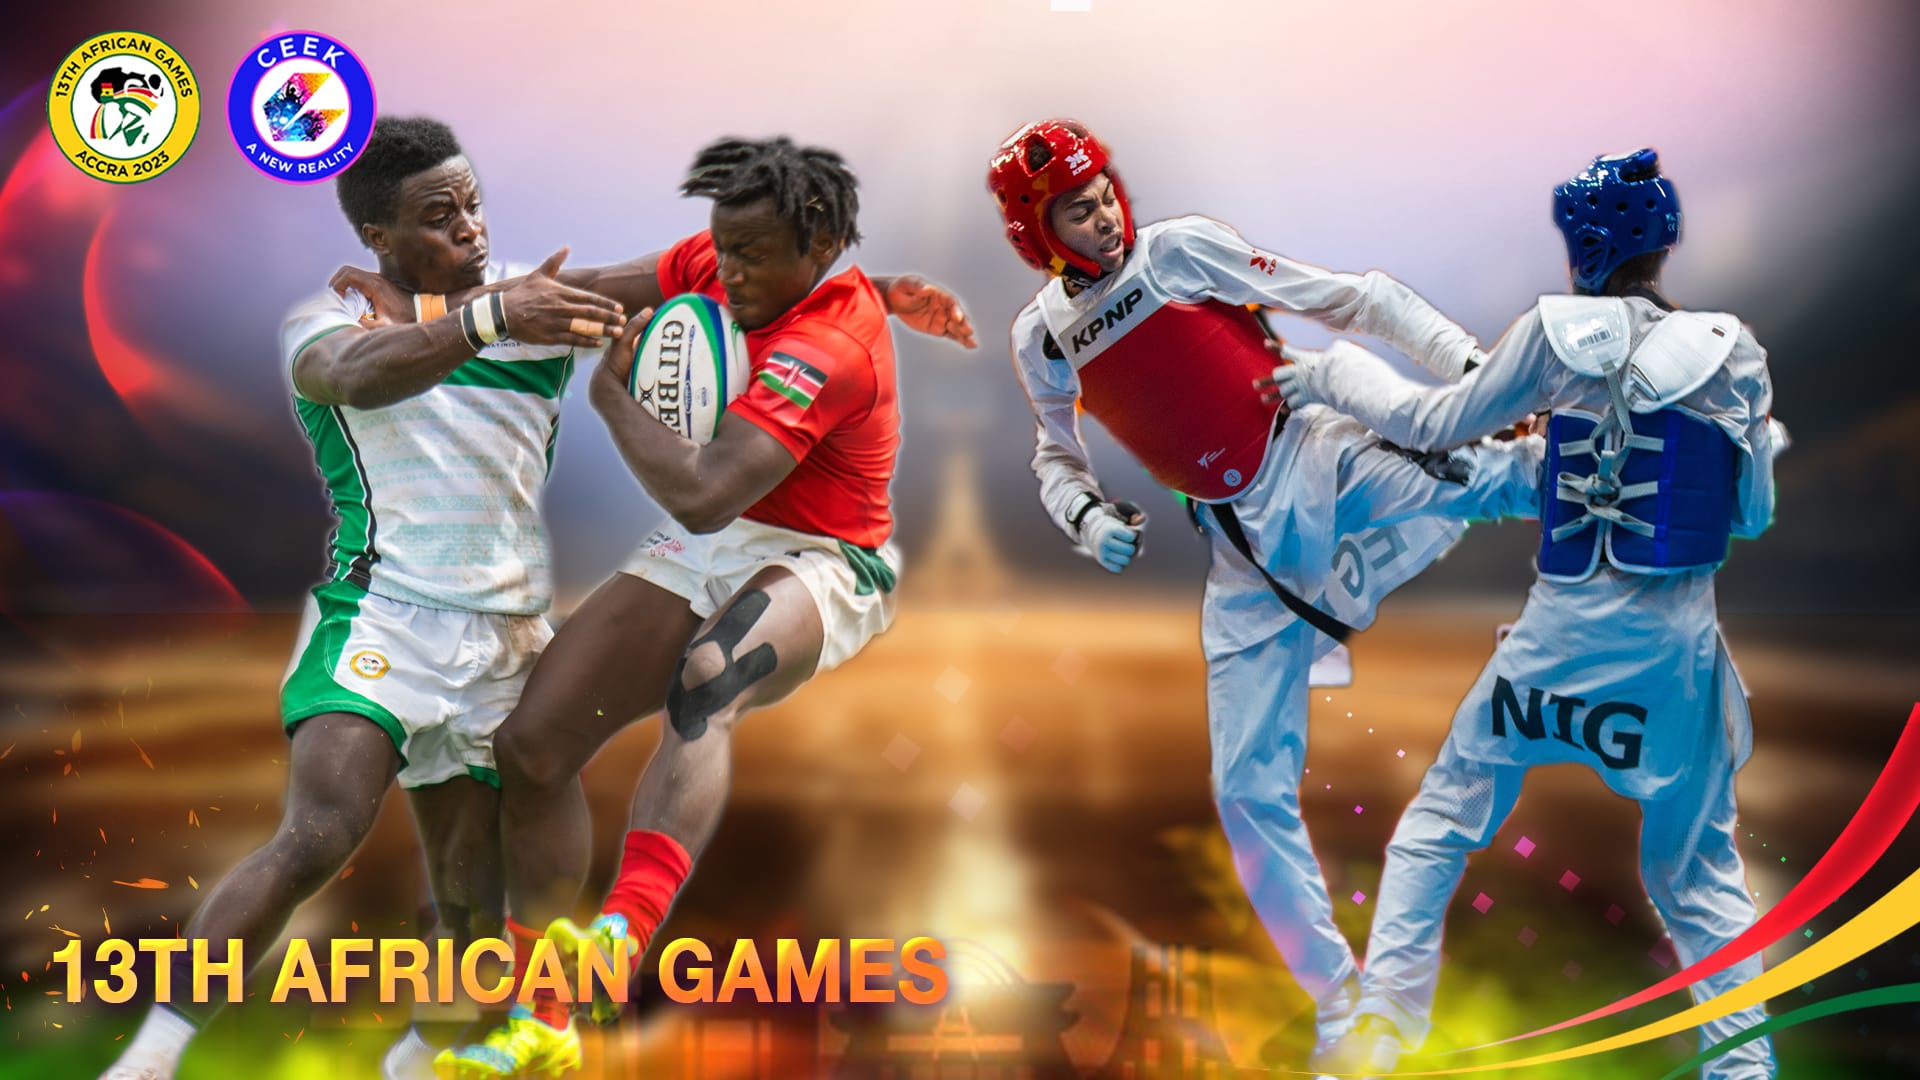 Accra African Games 21st March